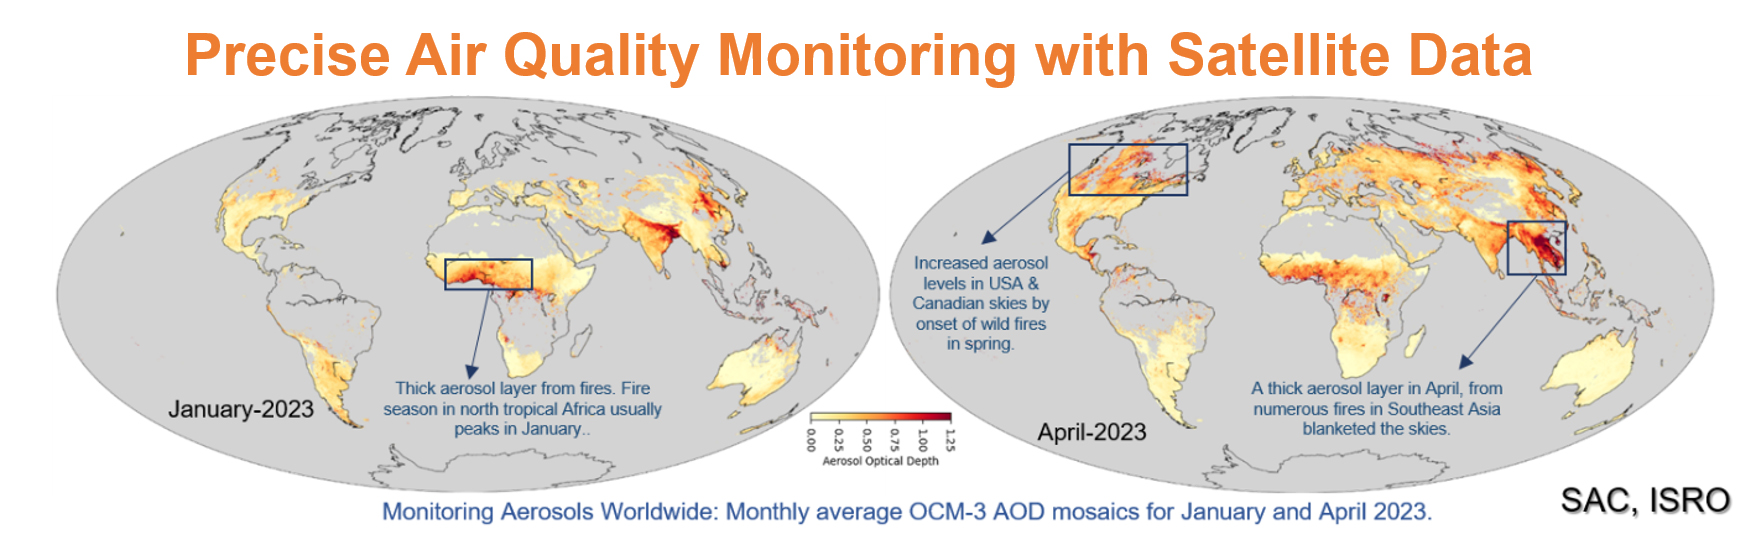 Precise Air Quality Monitoring with OCM-3 Aerosol Optical Depth Product from EOS-6 Satellite